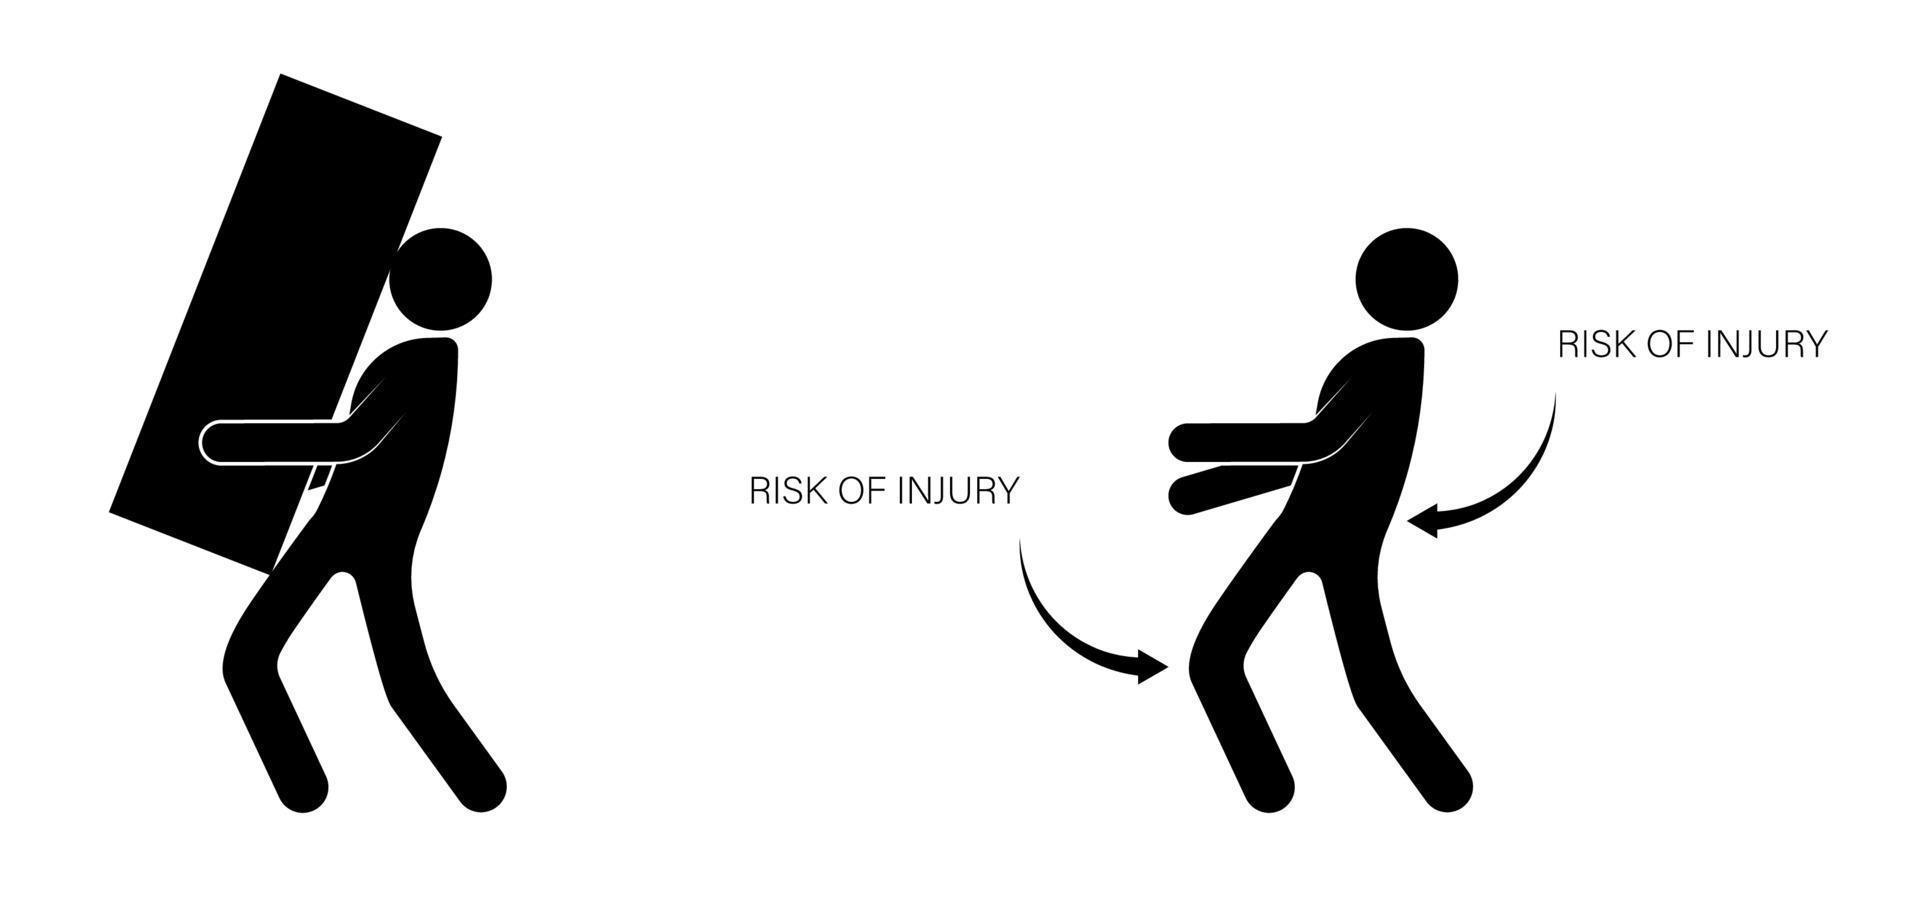 person, a loader incorrectly carries a heavy load, increasing the risk of injury. Isolated vector on white background